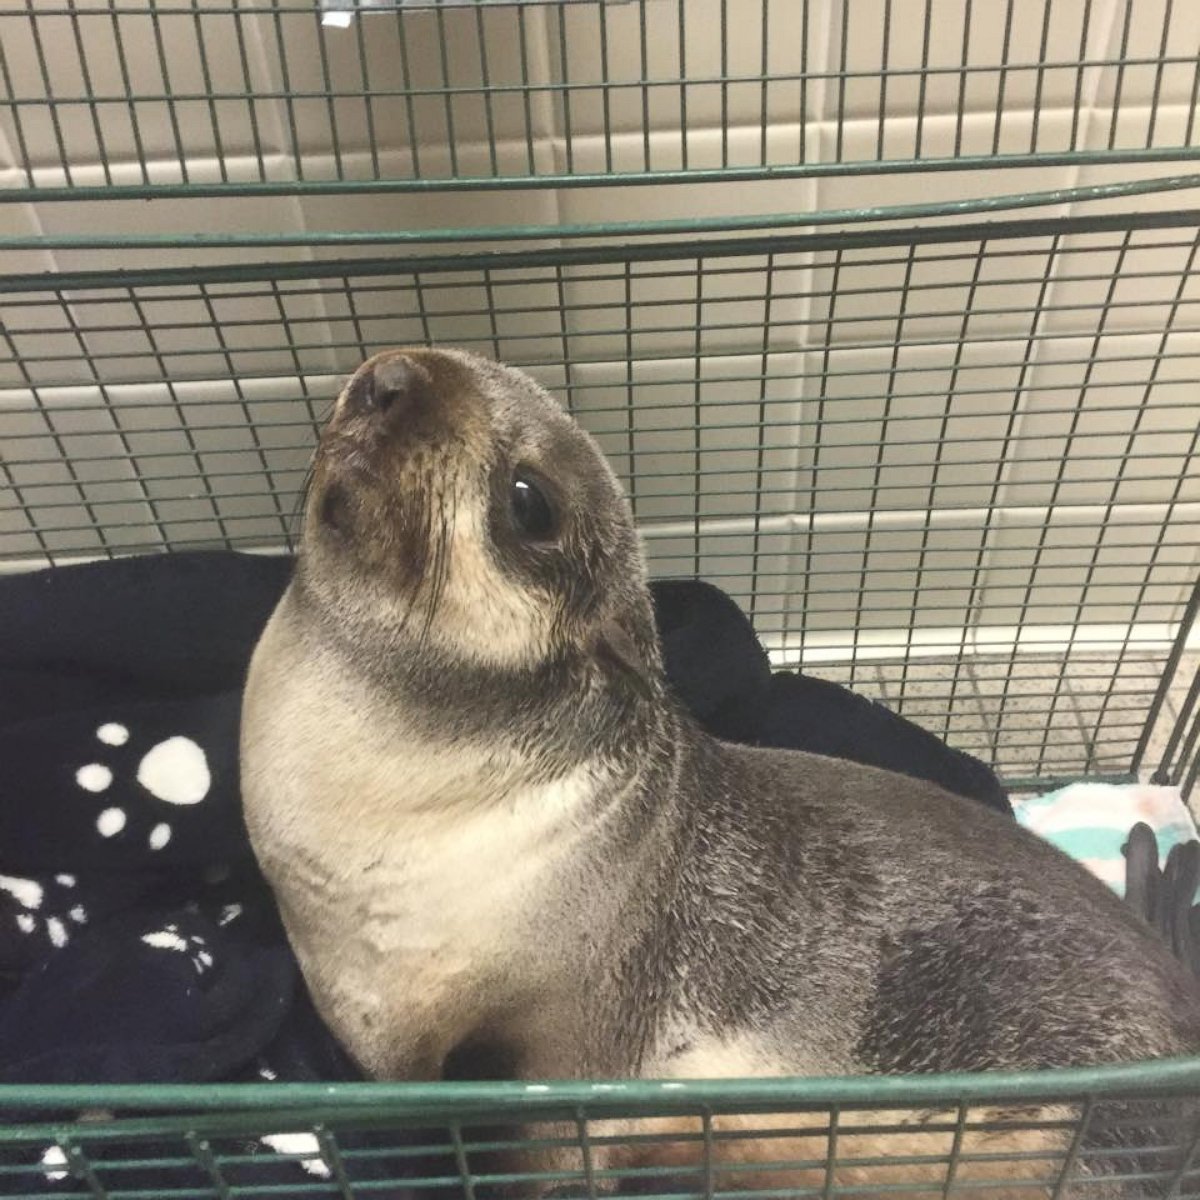 PHOTO: Kumofur, 9-month-old northern fur seal pup, was rescued after being found outside a home in Fremont, California, on March 24, 2016, according to the Fremont Police Department. 